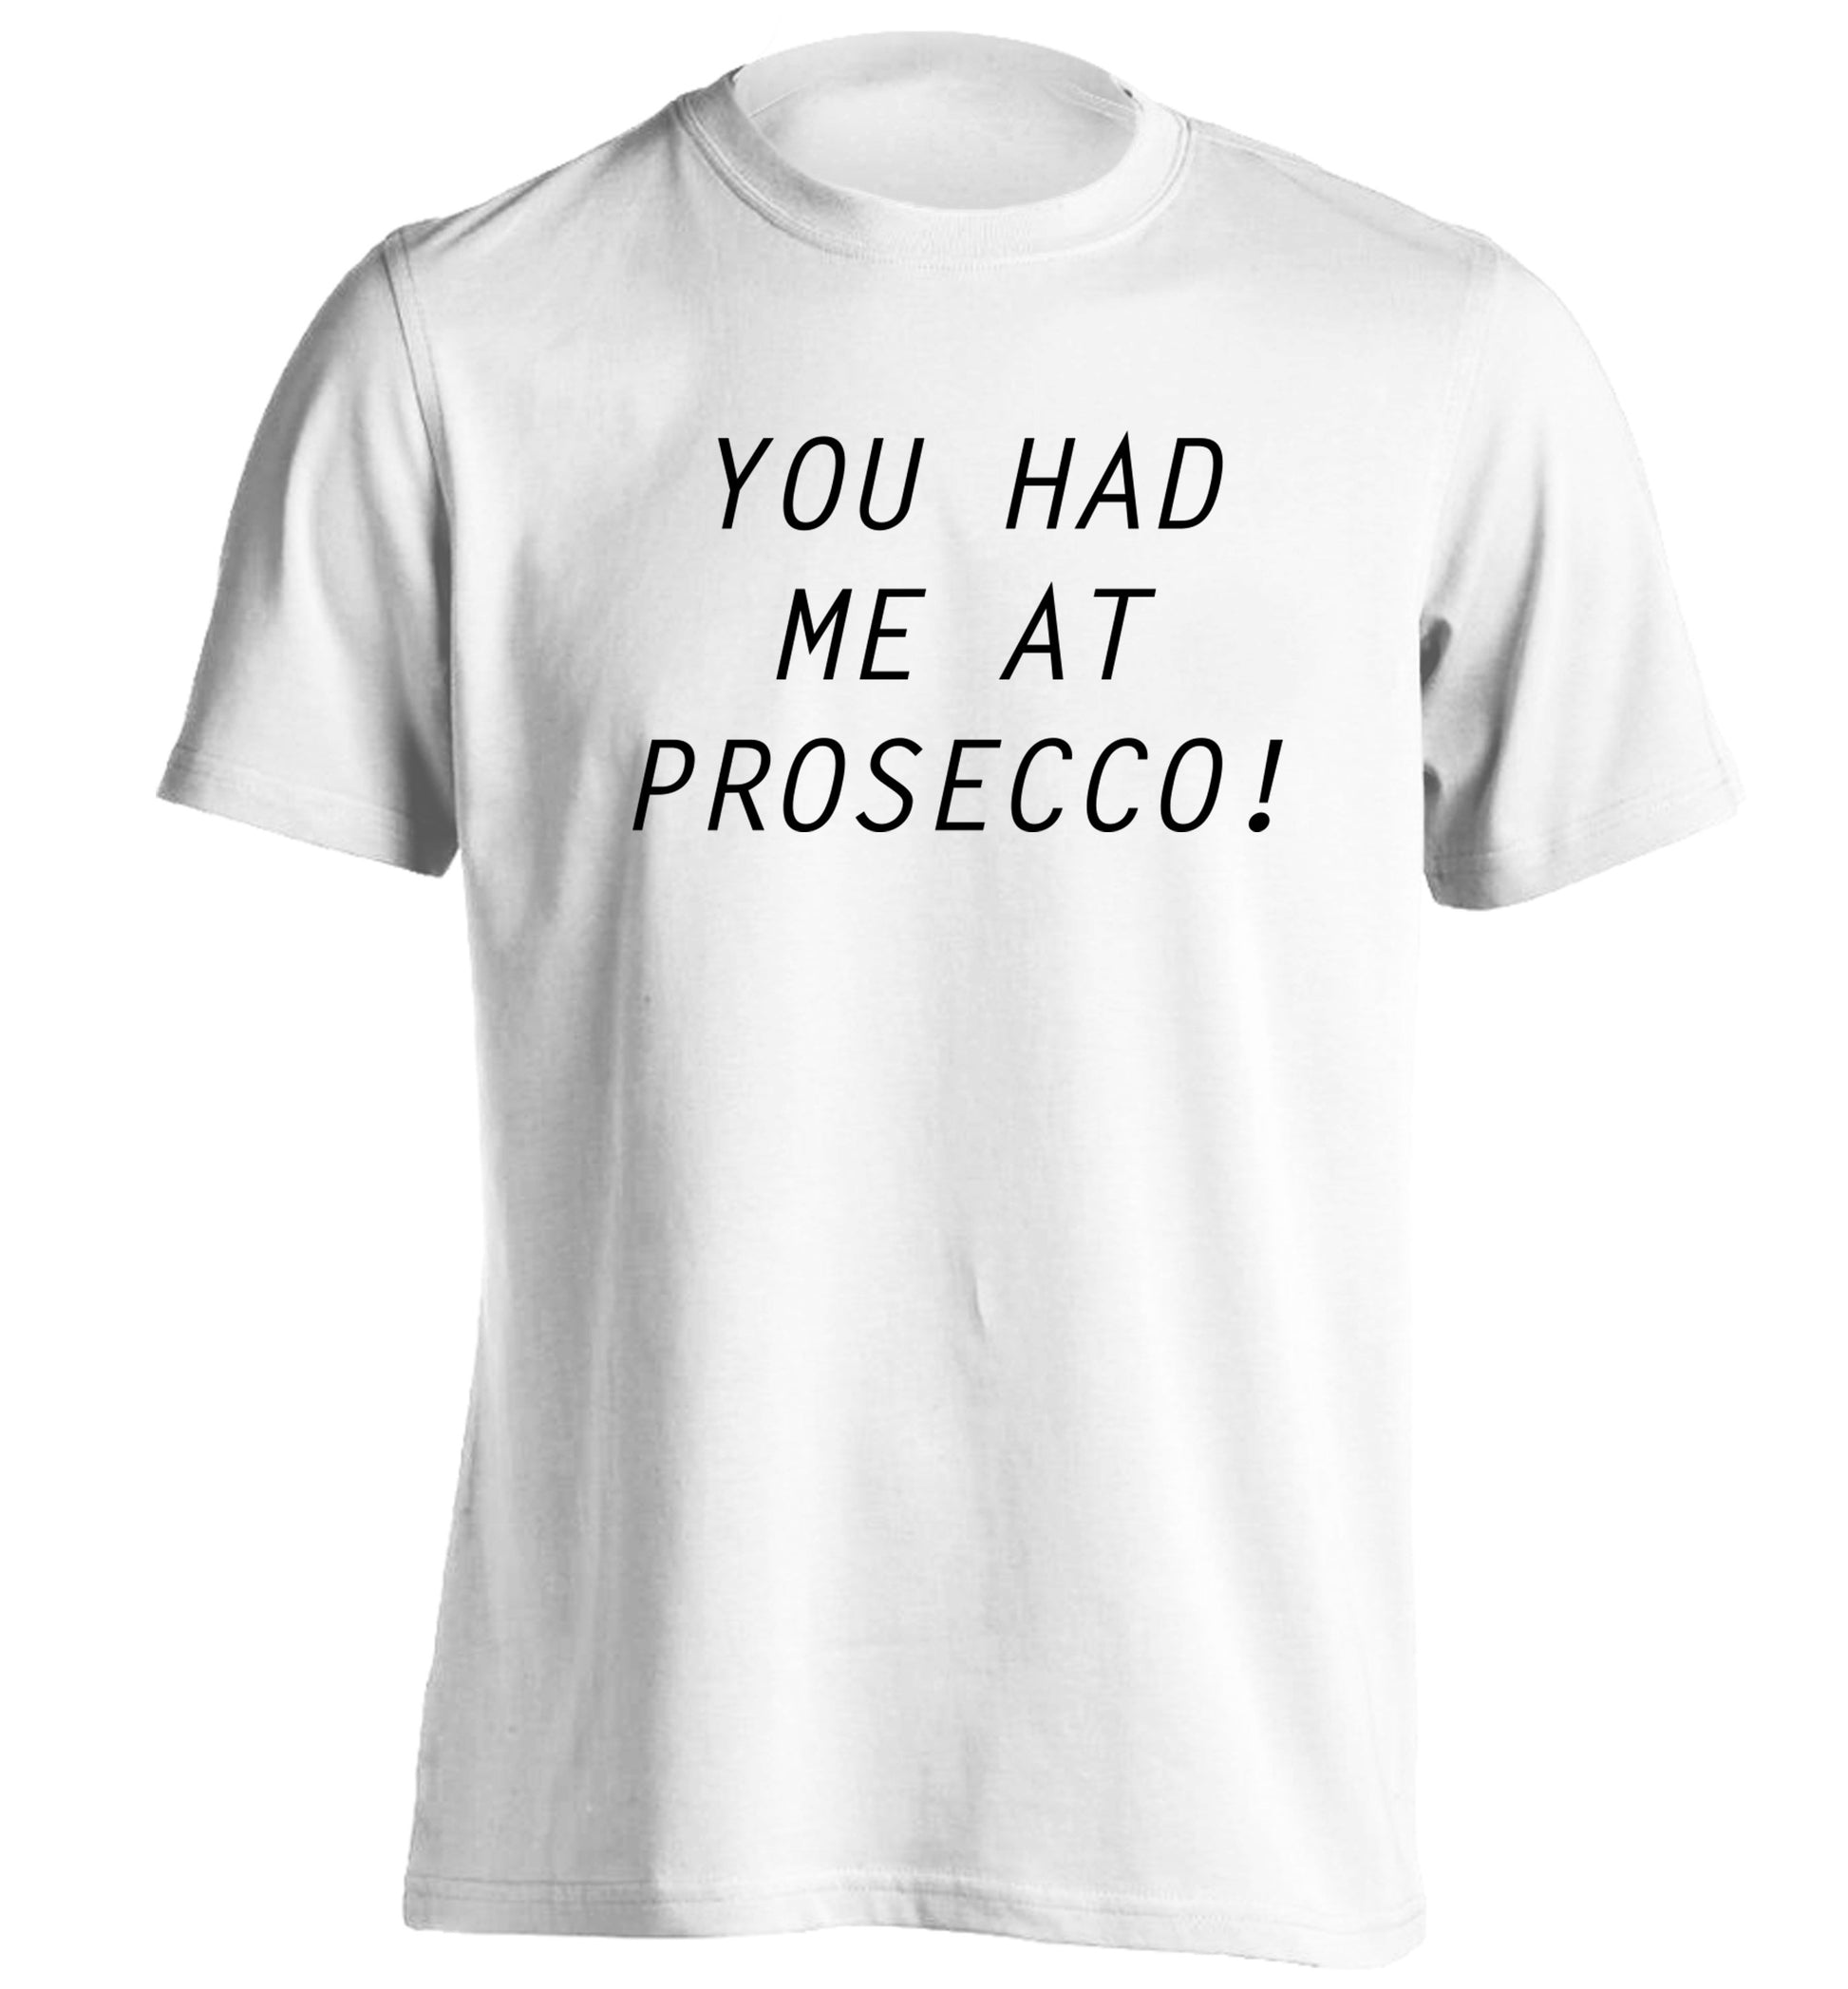 You had me at prosecco adults unisex white Tshirt 2XL